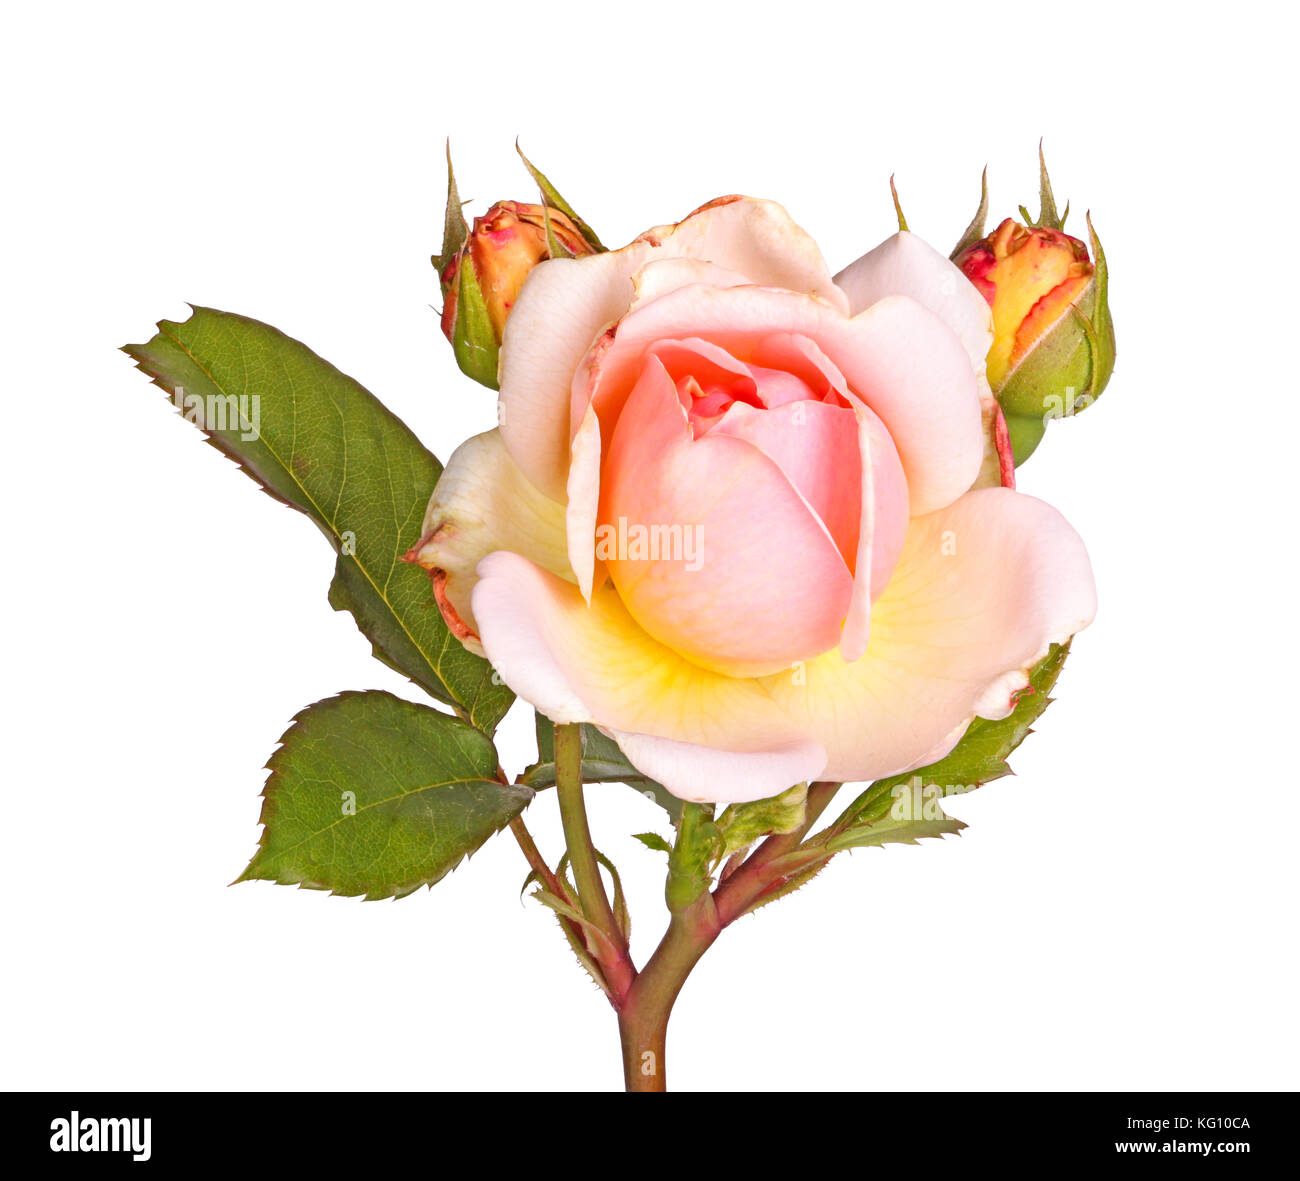 Single stem with a pink and yellow flower of a cultivated English rose and two developing buds isolated against a white background Stock Photo